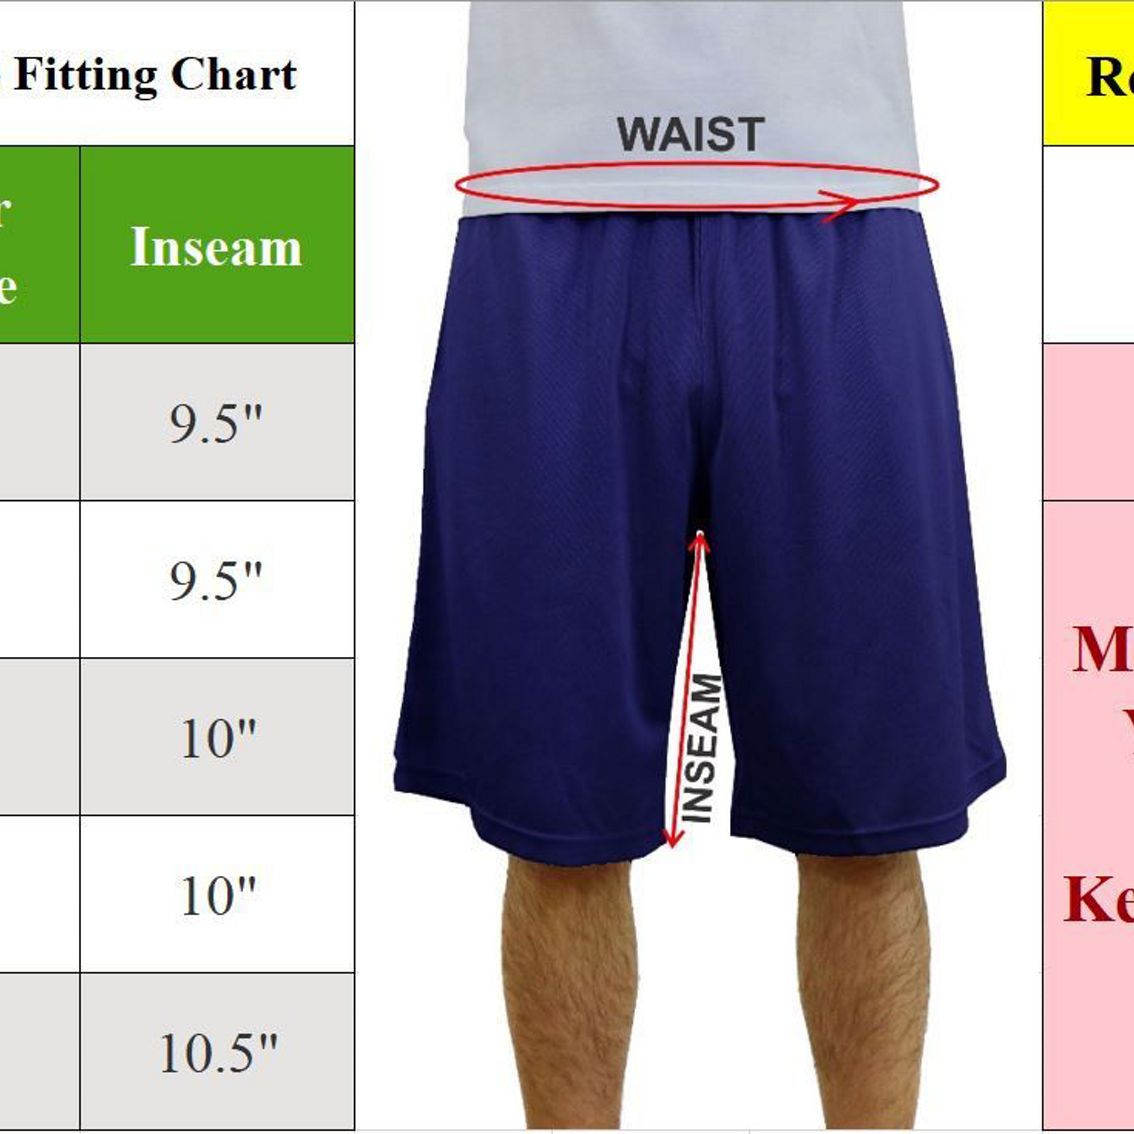 Galaxy By Harvic Men's Moisture Wicking Performance Basic Mesh Shorts - Image 2 of 2